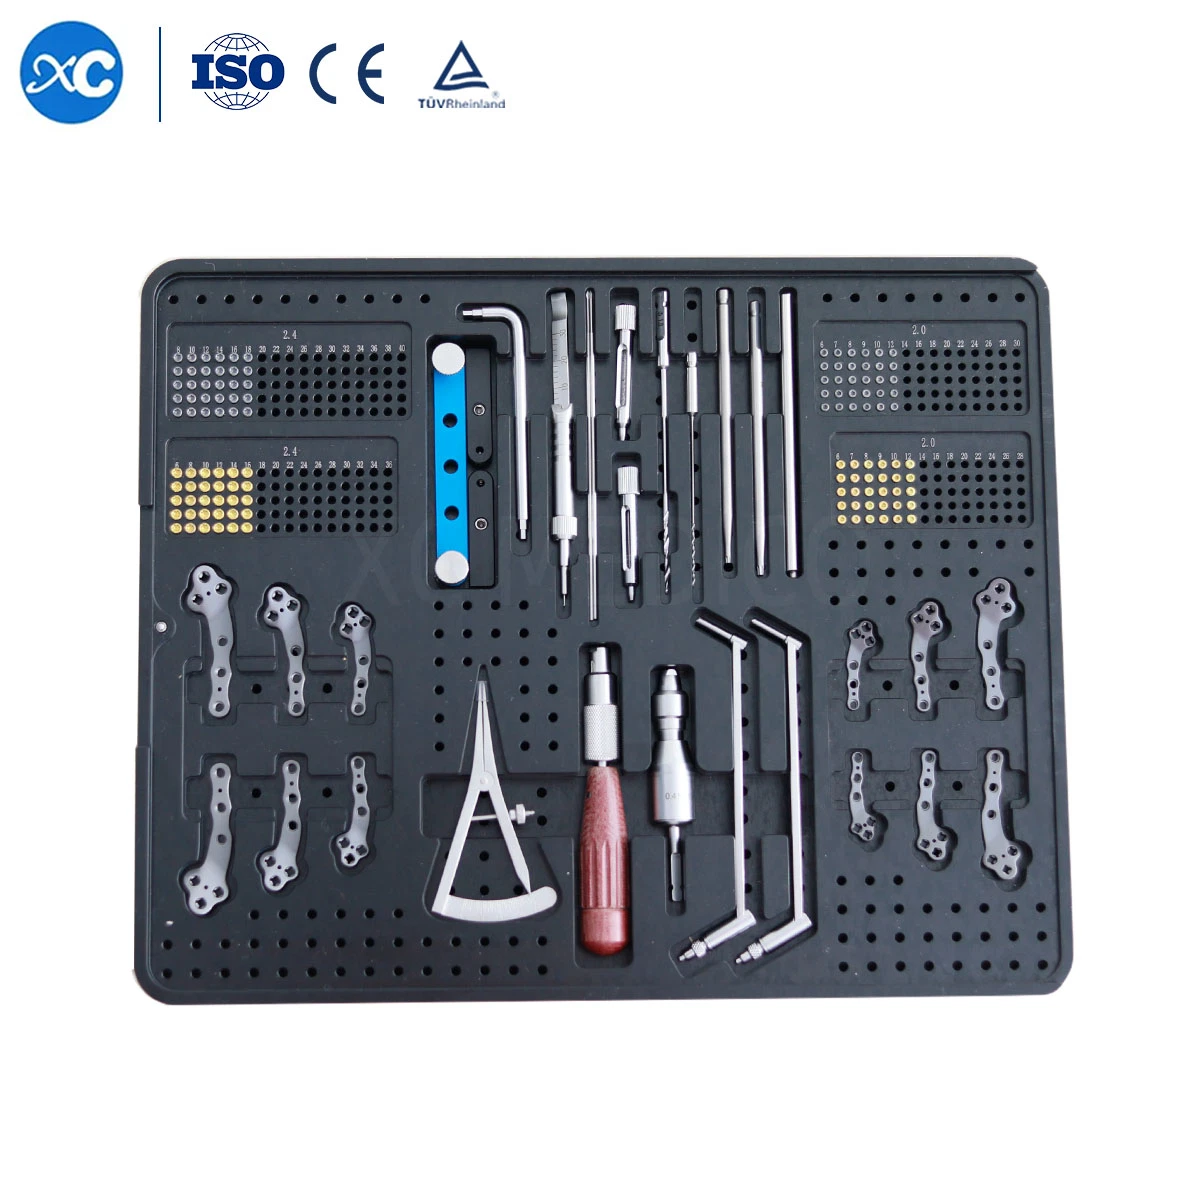 Veterinary Orthopedic Implants Tplo Locking Plates Screws and Instruments Set for Tplo System